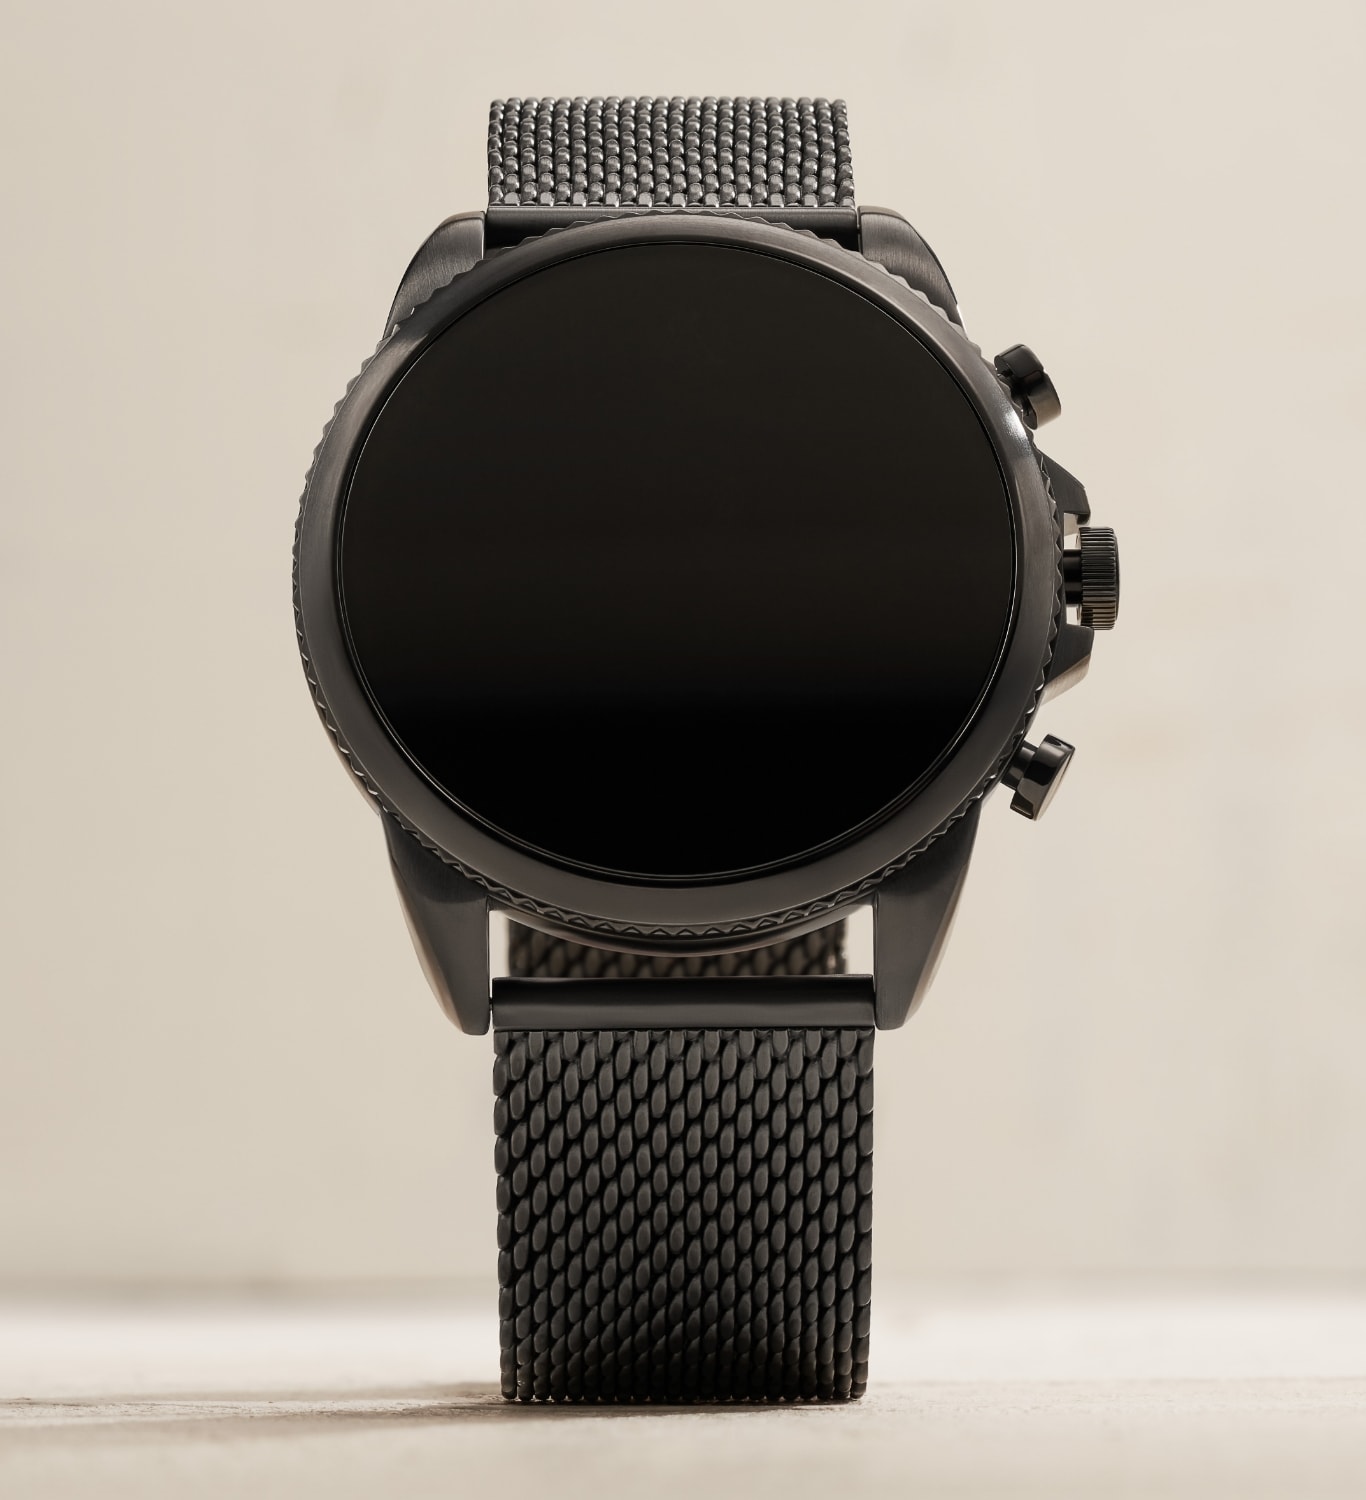 Gen 6 Smartwatches: Discover Our Most Advanced Smartwatch Release